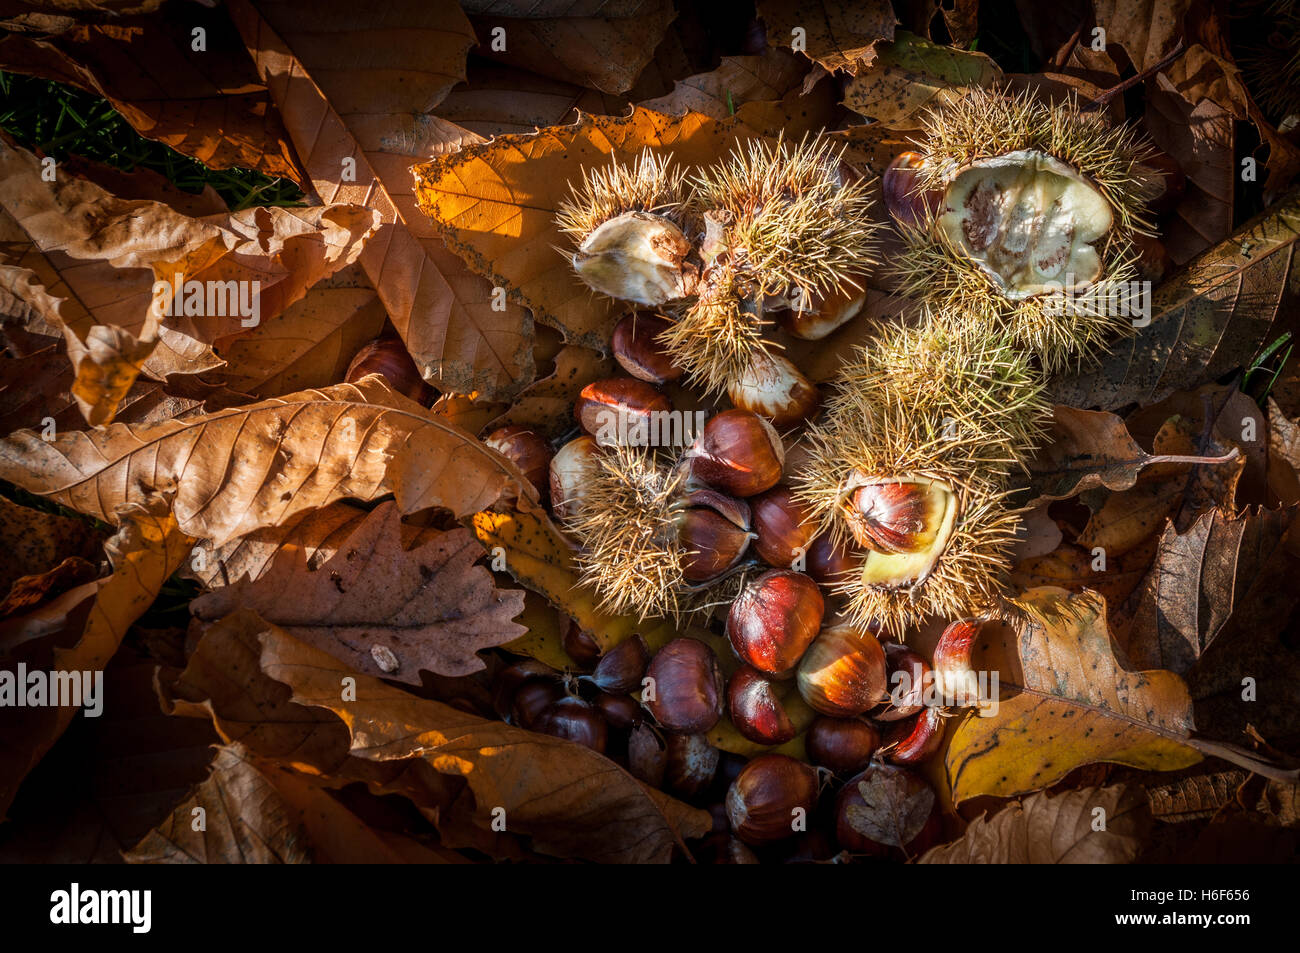 Sweet chestnut leaves and fruits lying on the ground as they are found under the tree in autumn. Scientific name Castanea sativa. Stock Photo